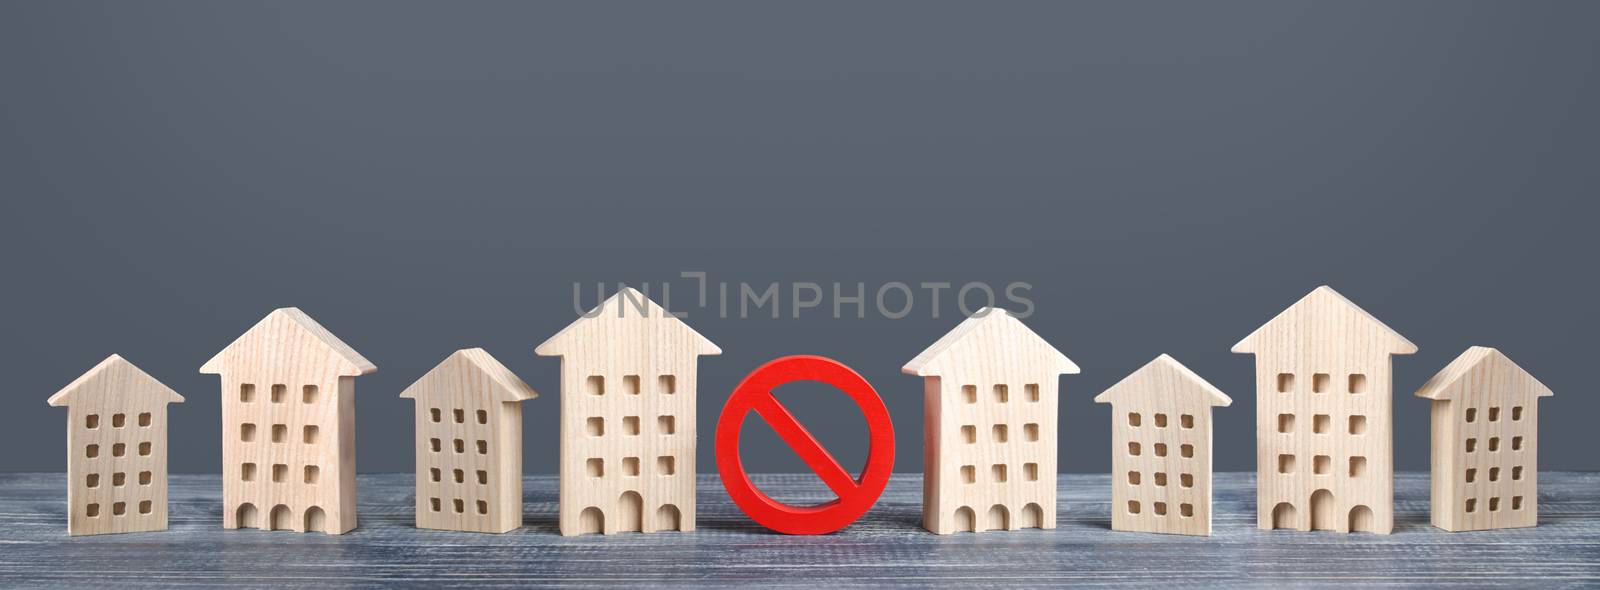 A red prohibition sign no stands among residential buildings. Restrictions ban on construction. Inaccessible expensive housing. Restriction building compaction. Underdeveloped infrastructure utilities by iLixe48